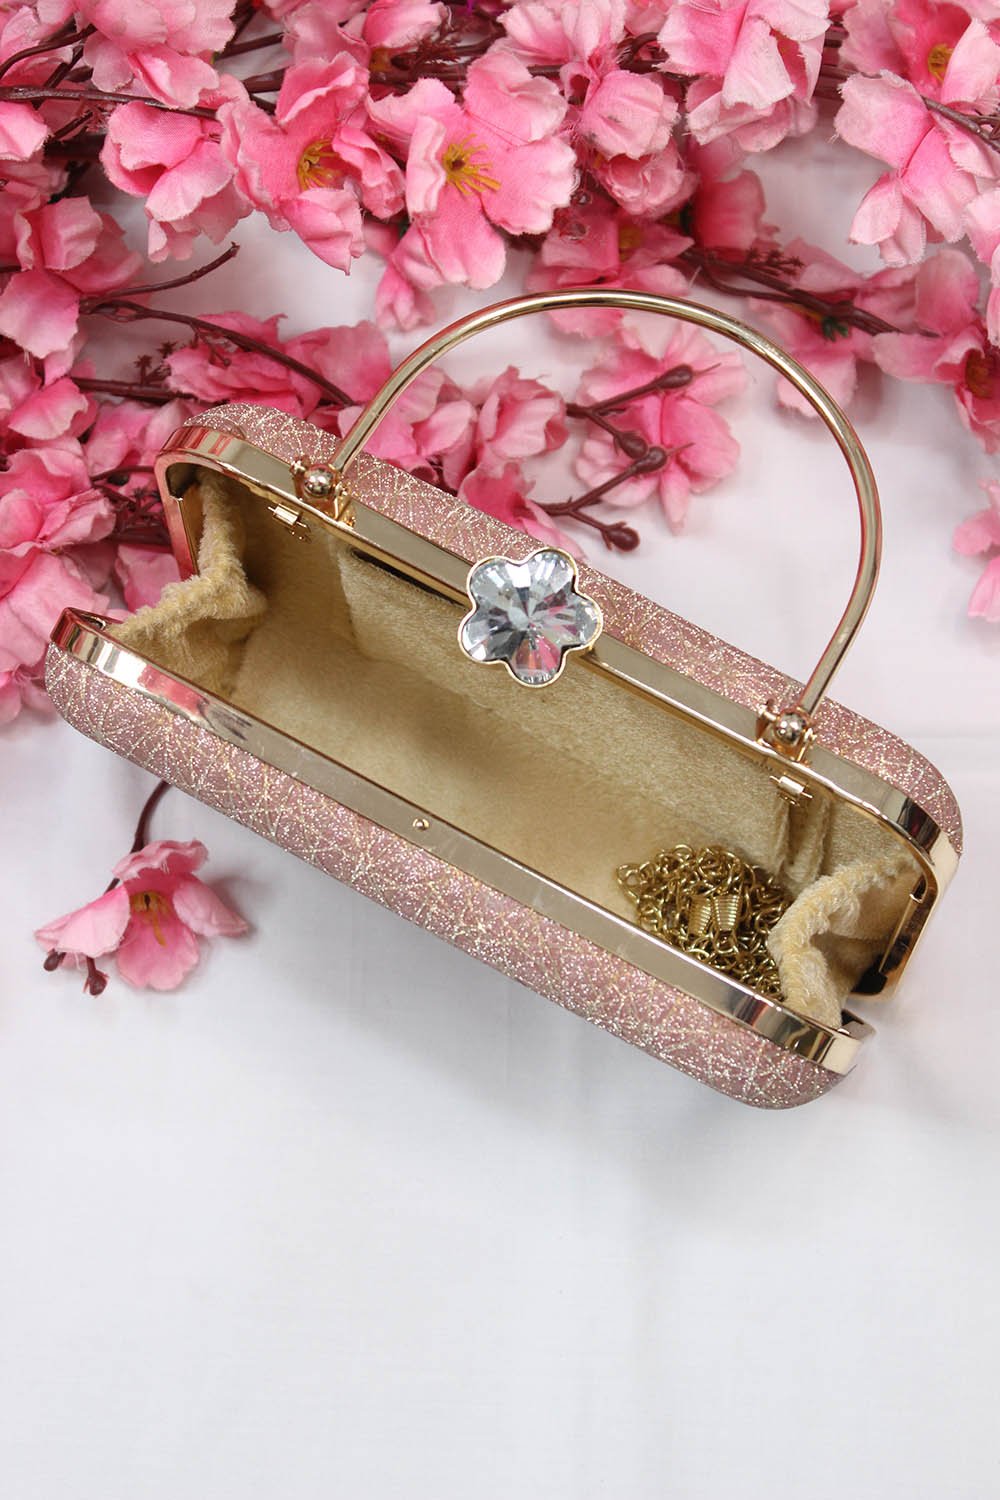 Do you really need a clutch bag at your wedding? - Quora